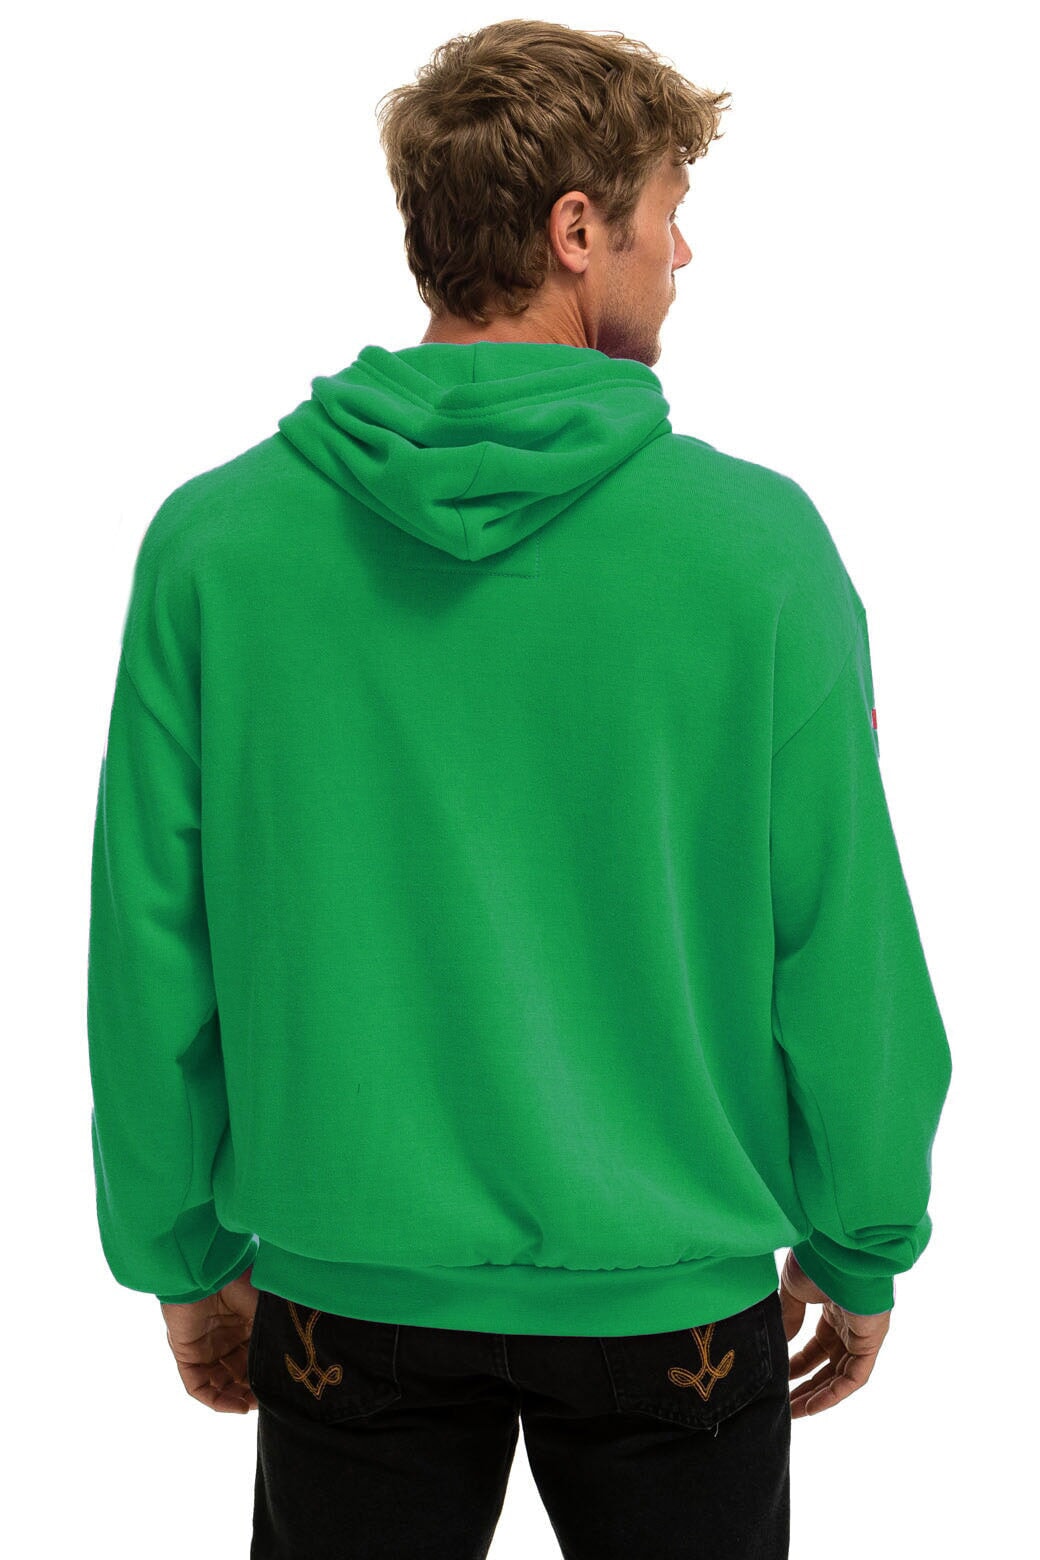 AVIATOR NATION MILL VALLEY RELAXED PULLOVER HOODIE - KELLY GREEN Hoodie Aviator Nation 